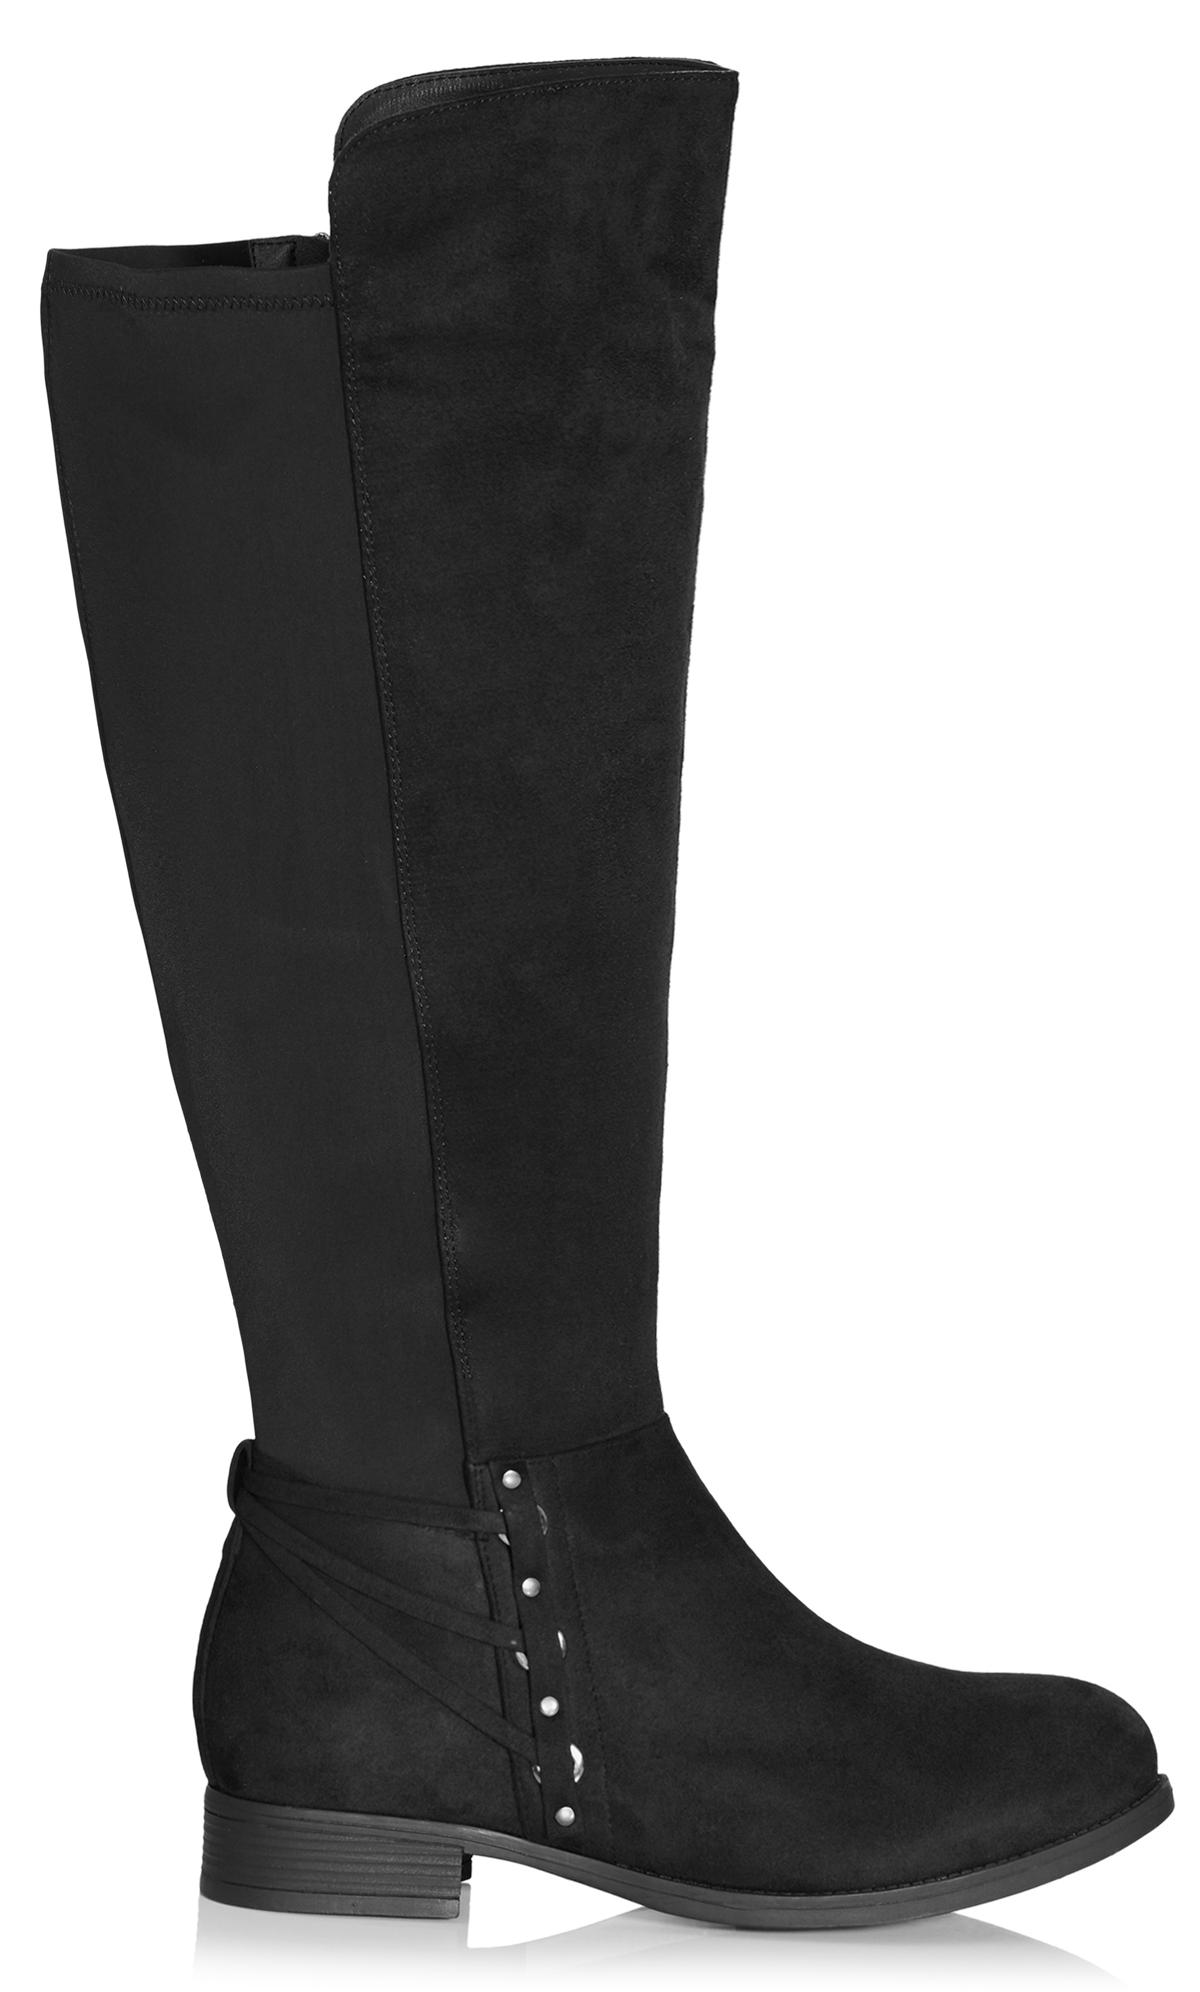 Evans WIDE FIT Black Strapping & Hoop Knee High Boots 2